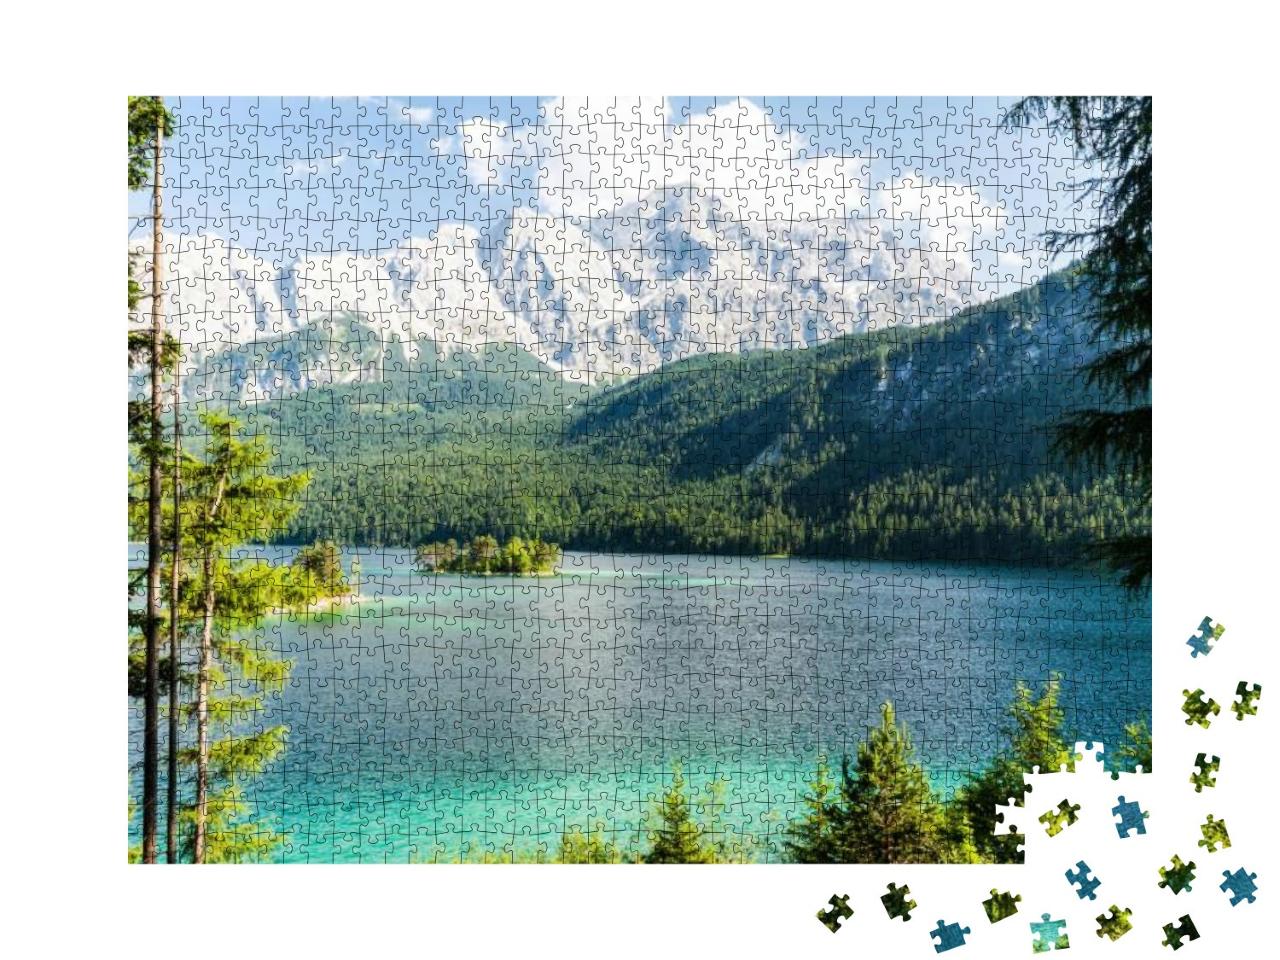 Eibsee in Front the Alps... Jigsaw Puzzle with 1000 pieces